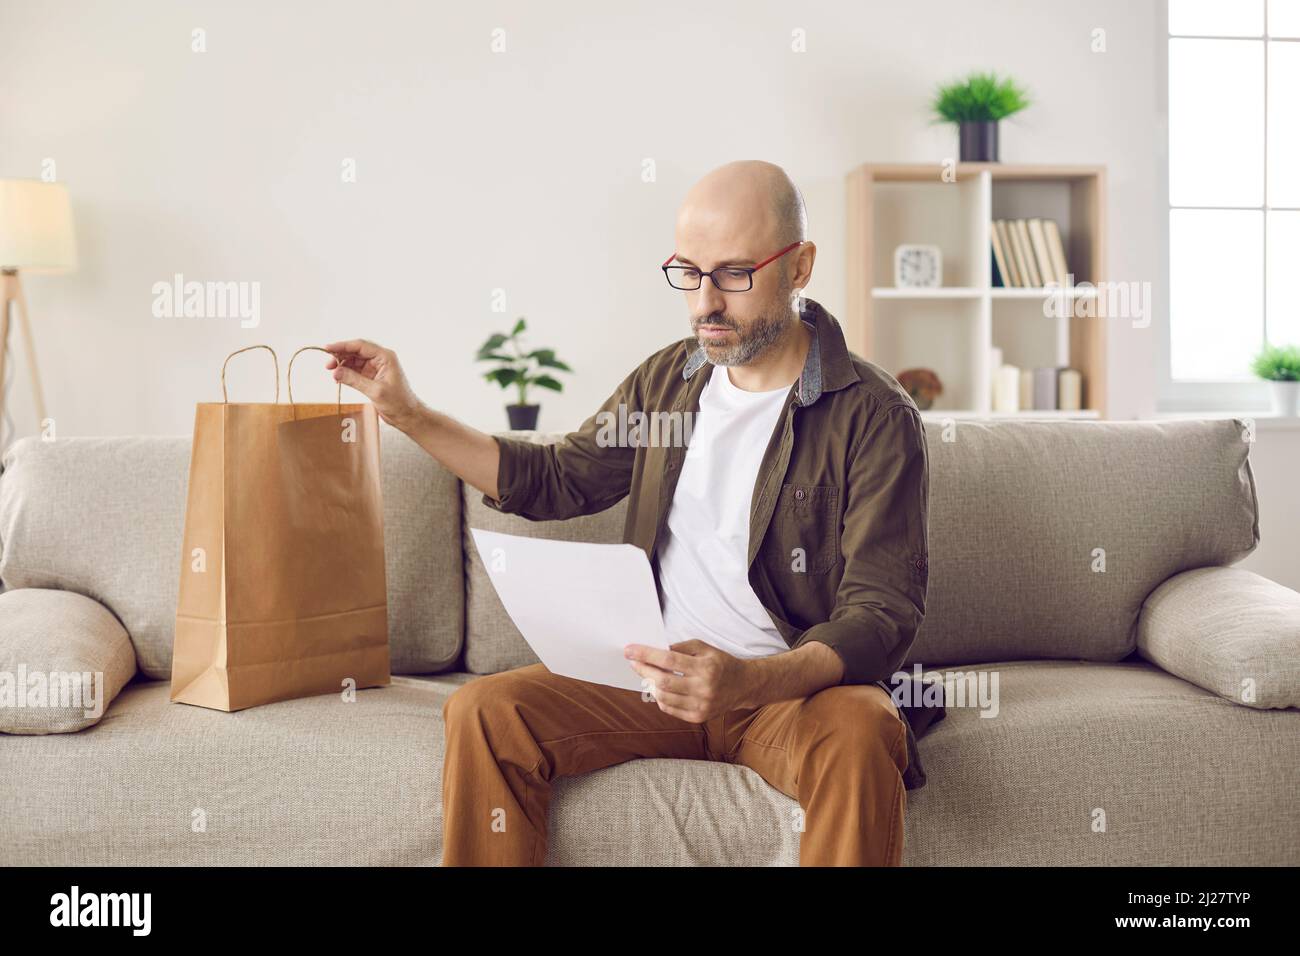 Man sitting on sofa at home and reading letter he got together with paper delivery bag Stock Photo